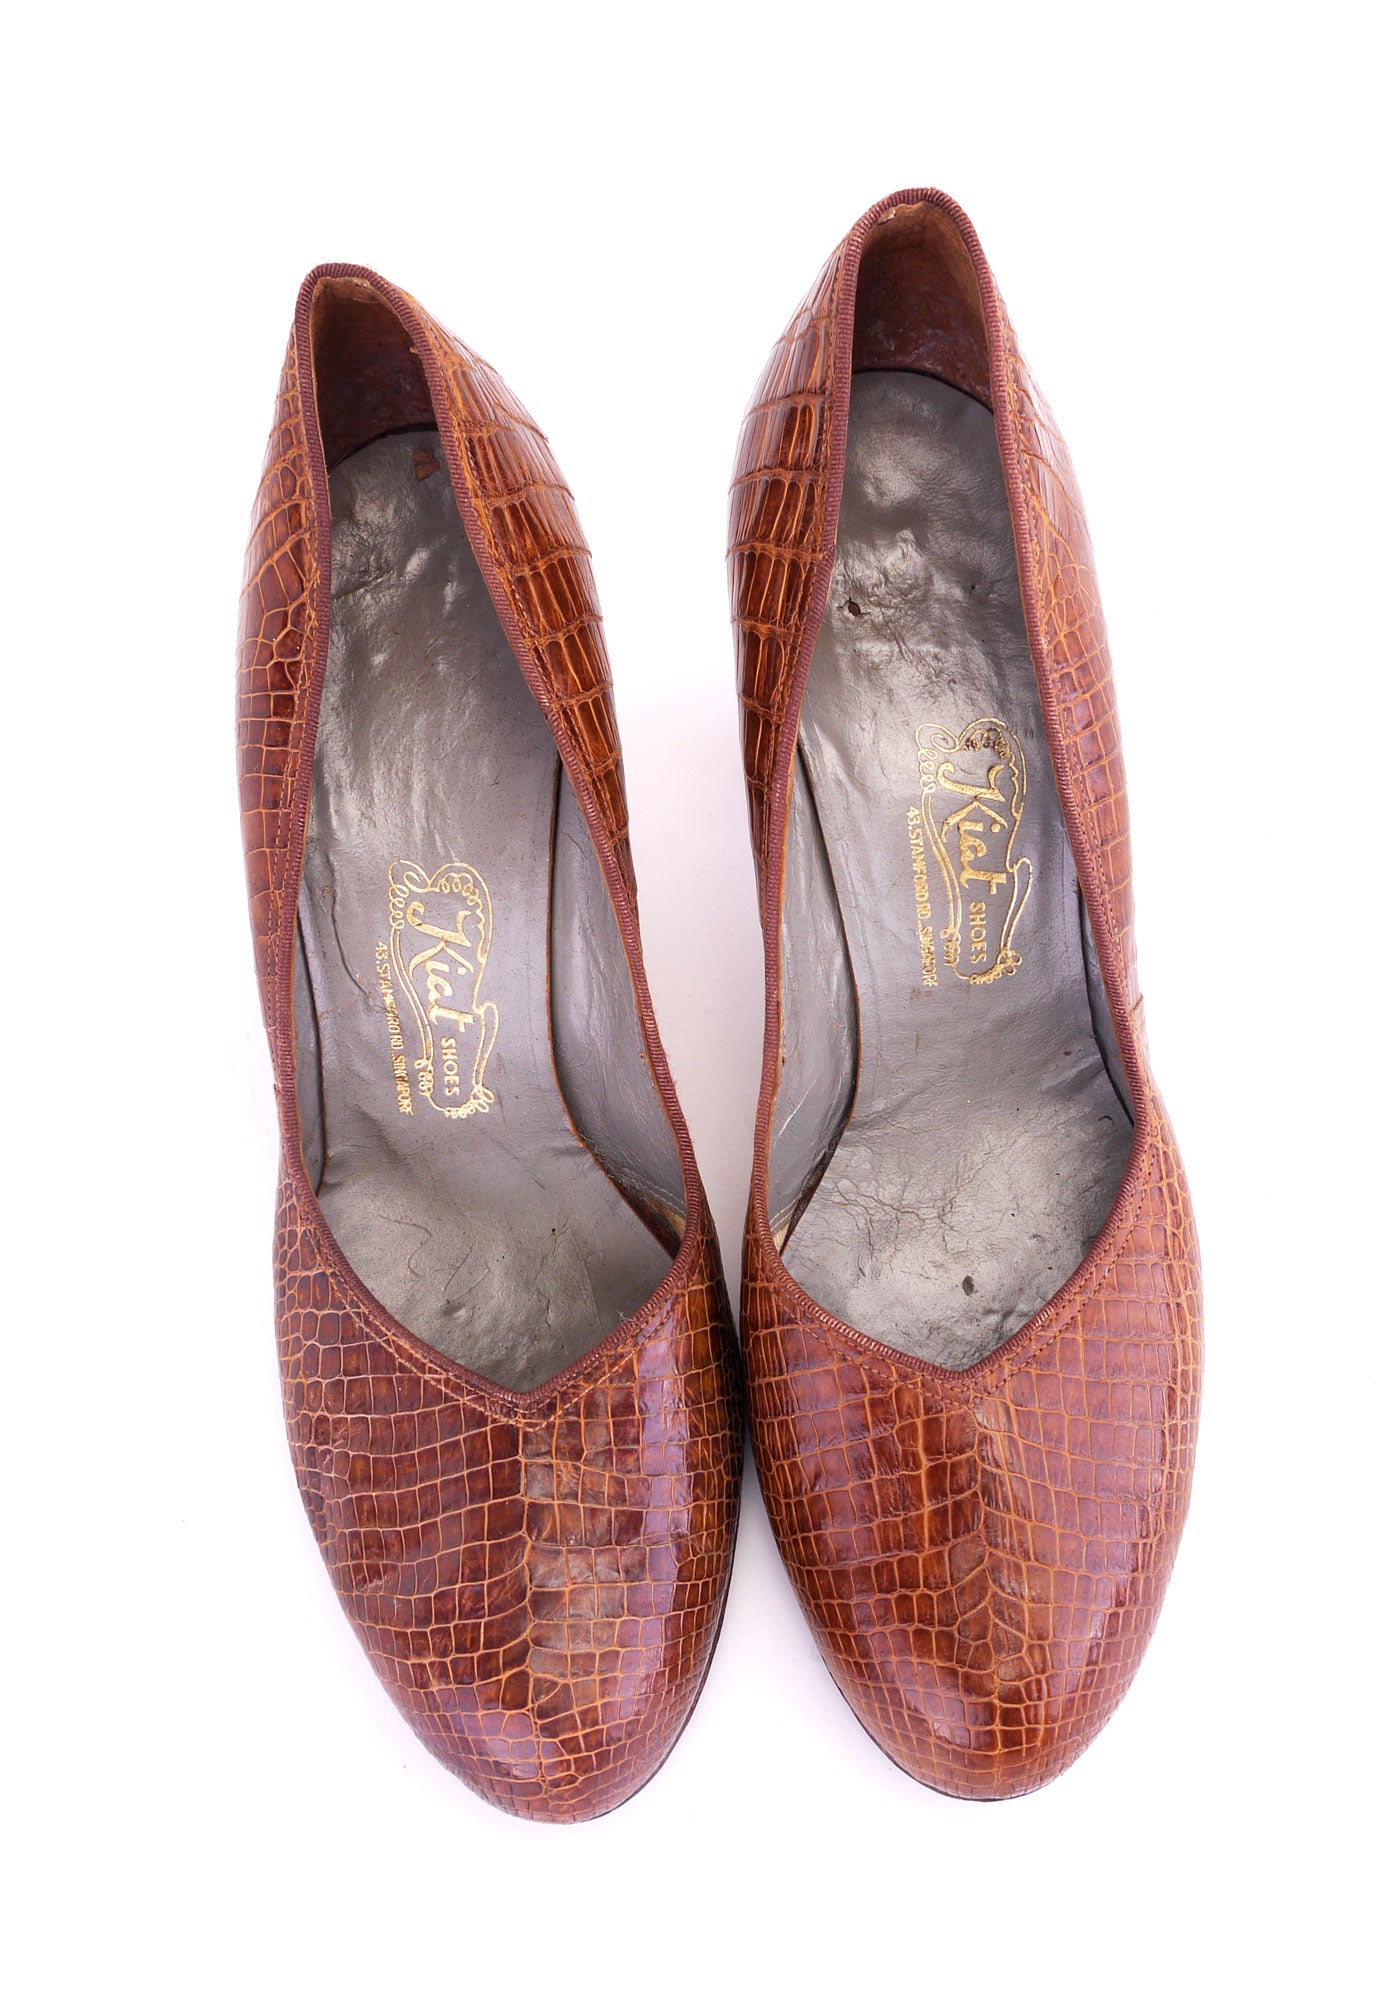 1940s / 50s Baby Doll Pumps in Cognac Leather UK 5.5